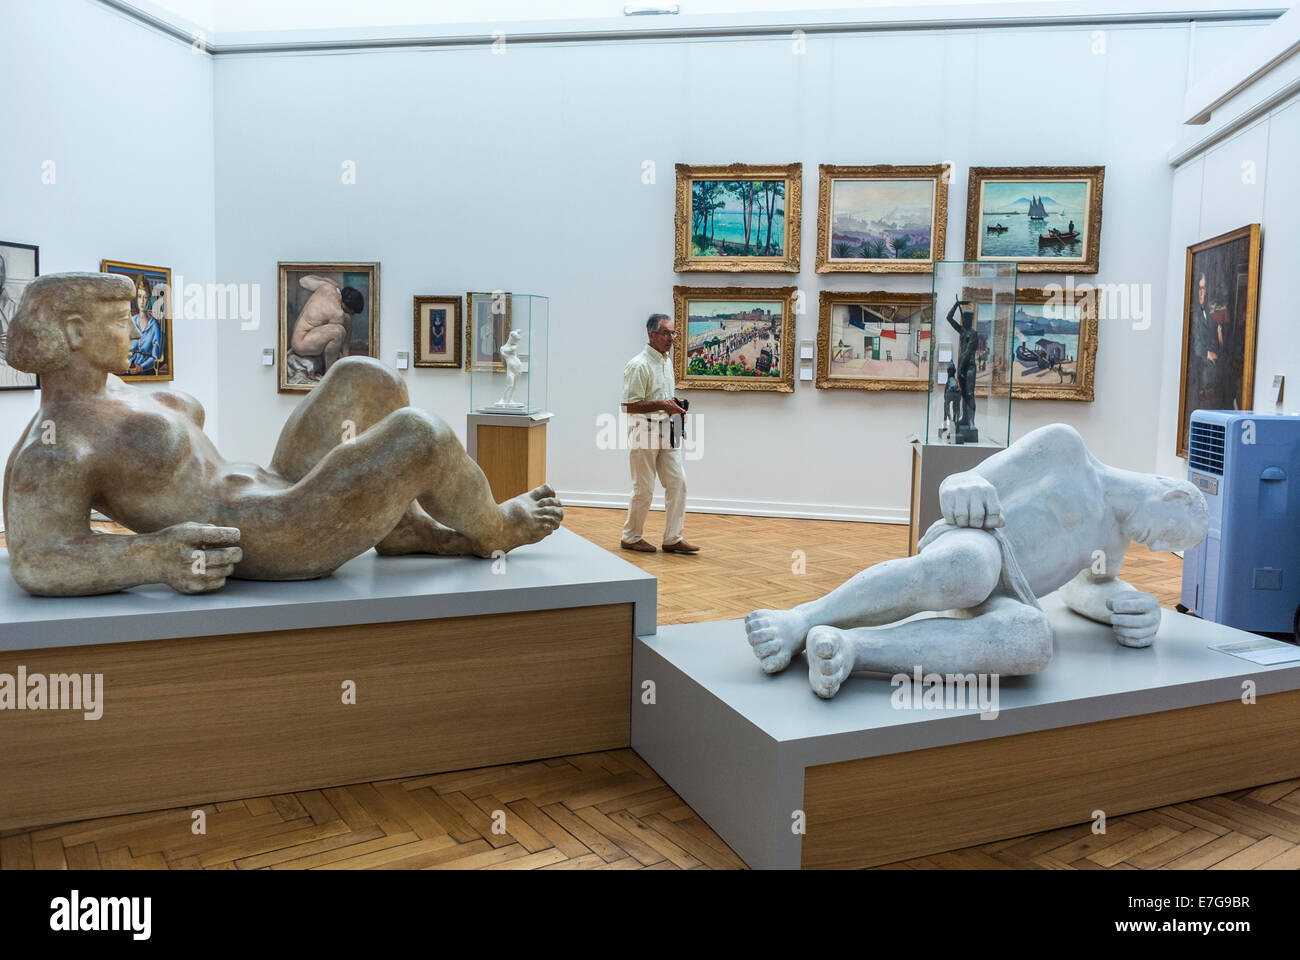 Bordeaux, France, Tourists Visiting  admiring art inside French Museum, 'Musée des Beaux-Arts' Modern Sculpture on Display statues Stock Photo